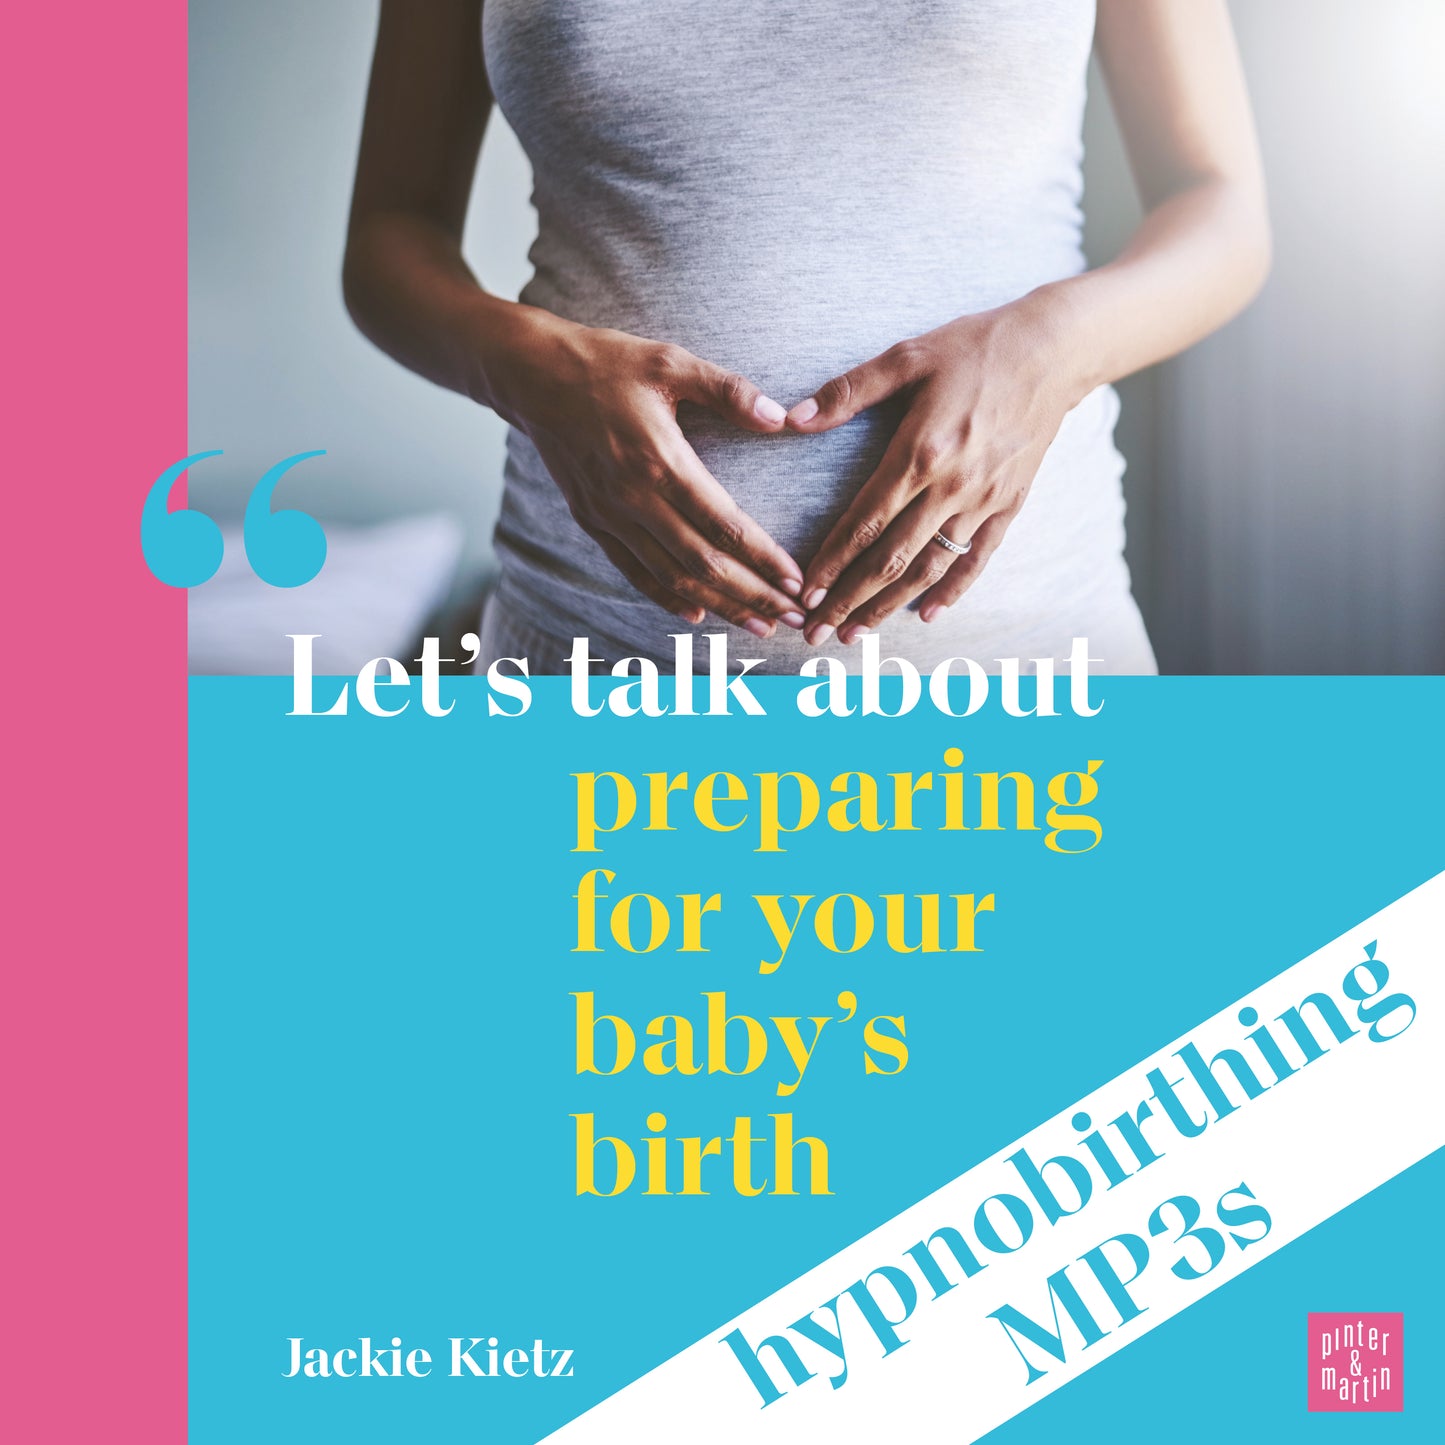 Let's talk about preparing for your baby's birth - hypnobirthing scripts (with music)